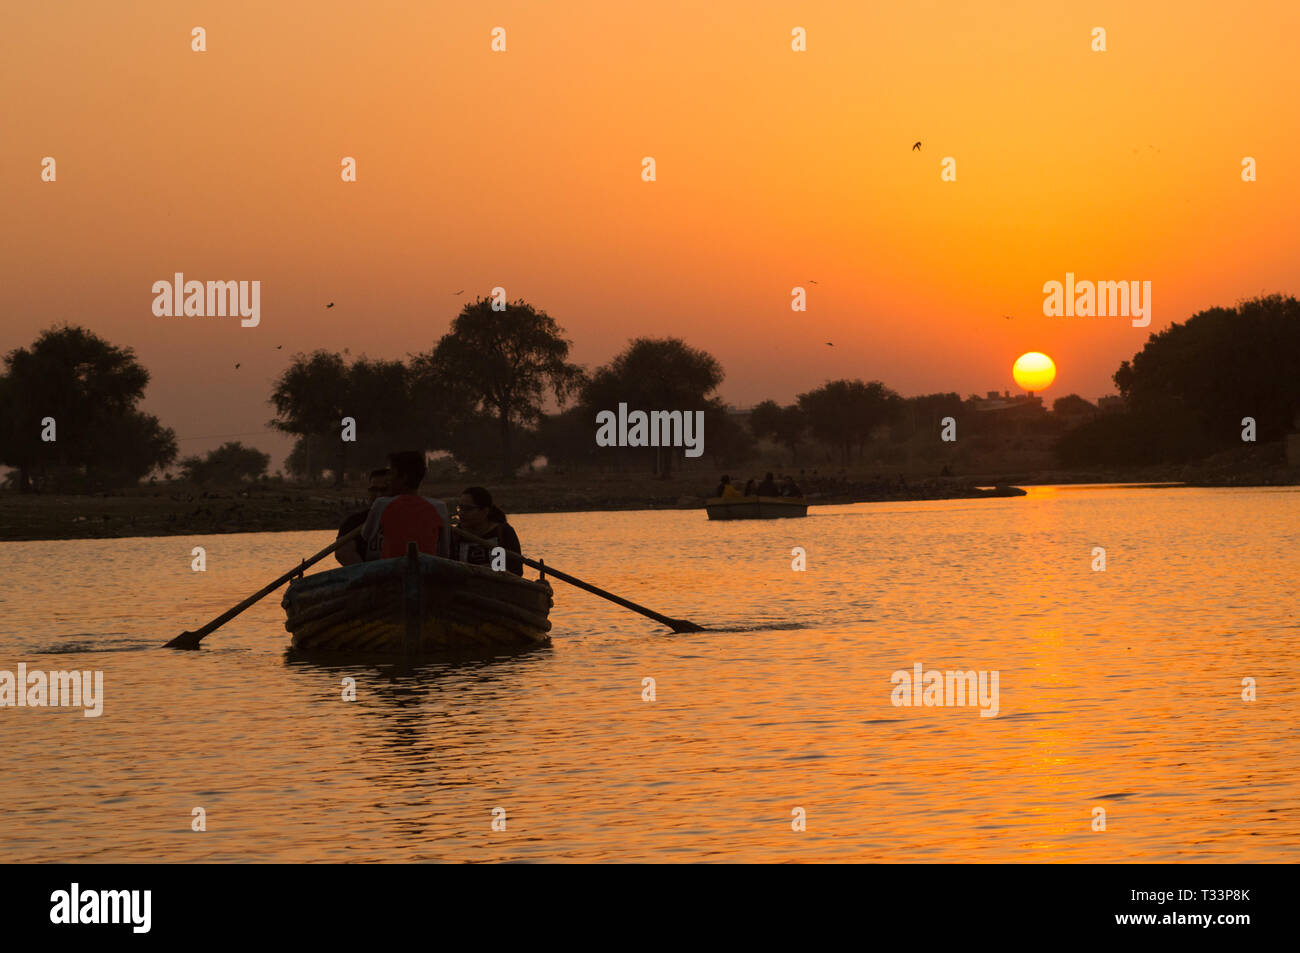 People taking a boat ride on Gadi Sagar lake in Jaisalmer at sunset with the sun in the background Stock Photo